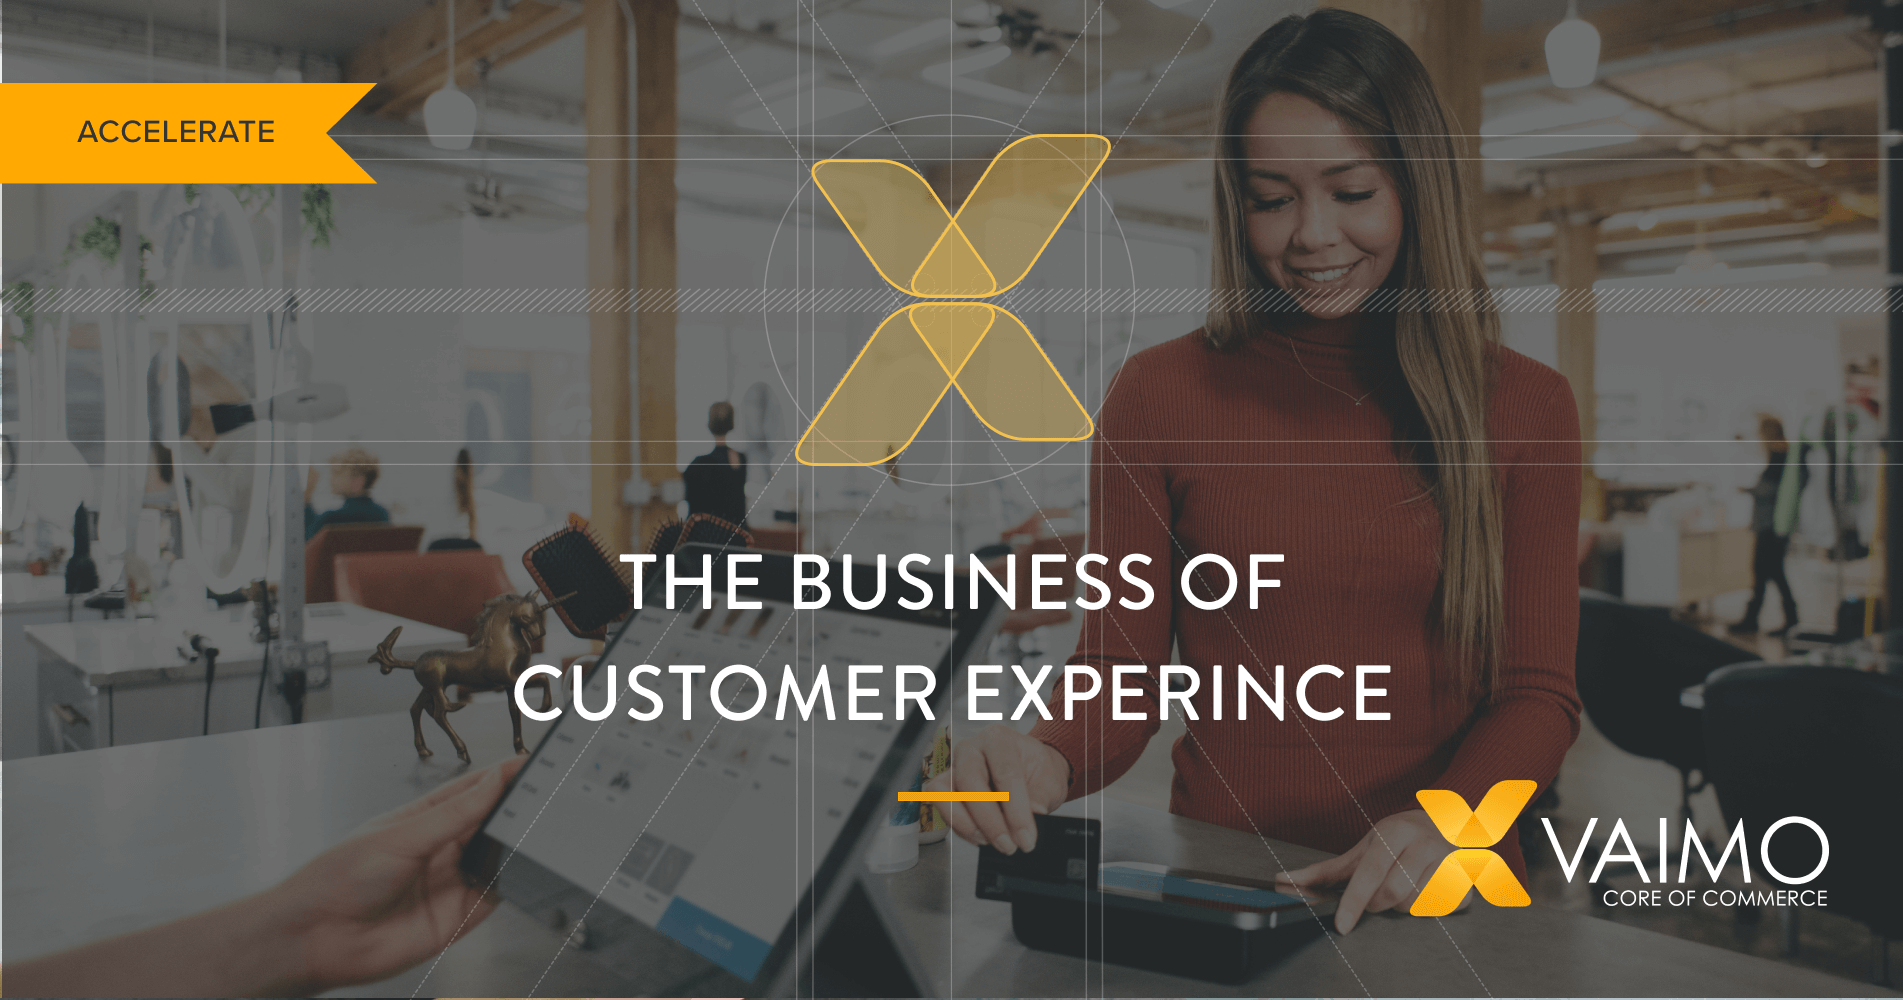 The Business of Customer Experience - Vaimo Accelerate